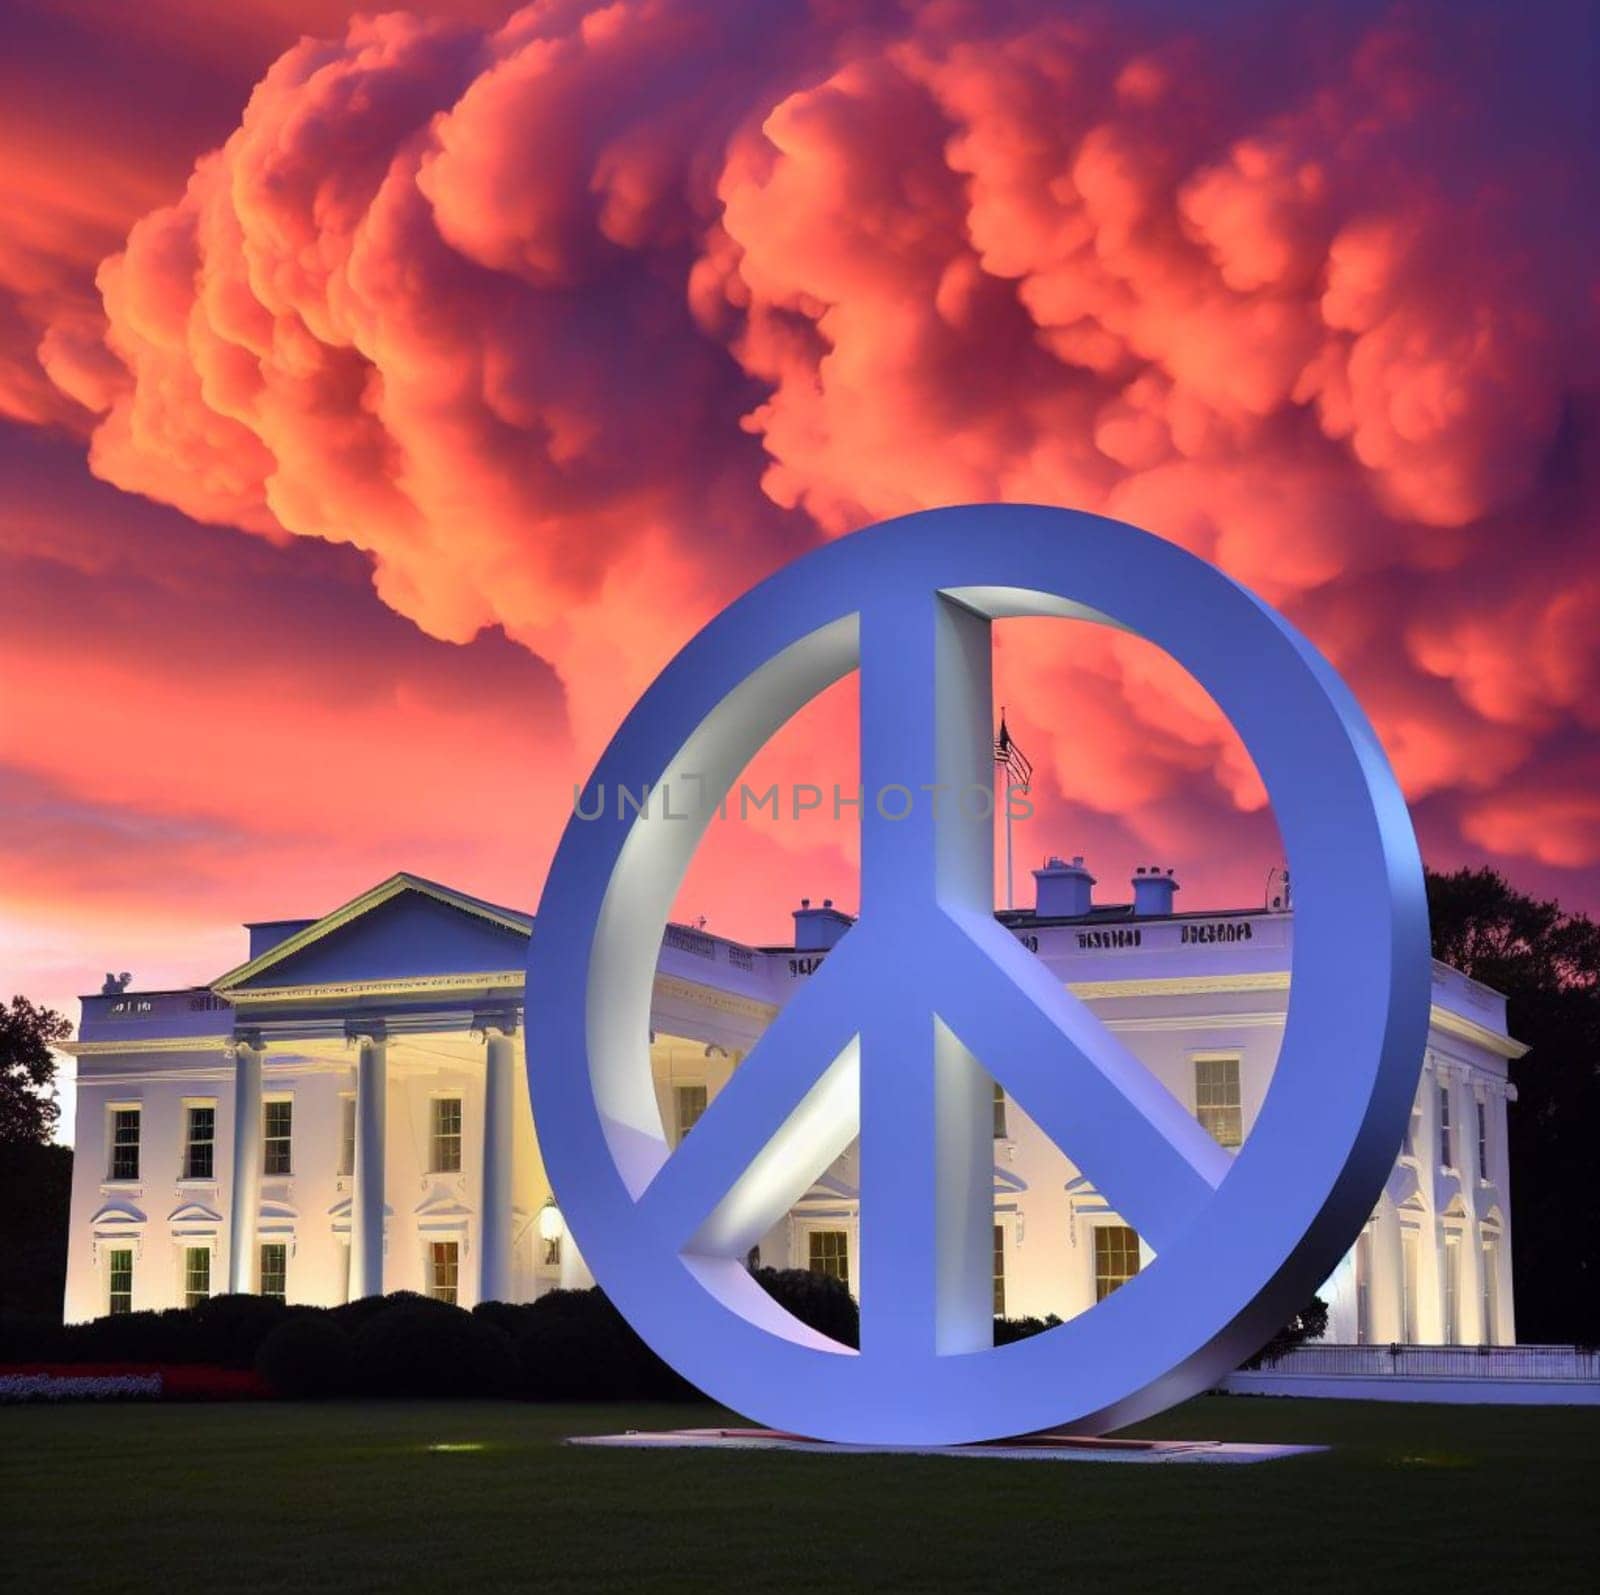 the symbol of peace made of clouds float in the sky over a white house by verbano